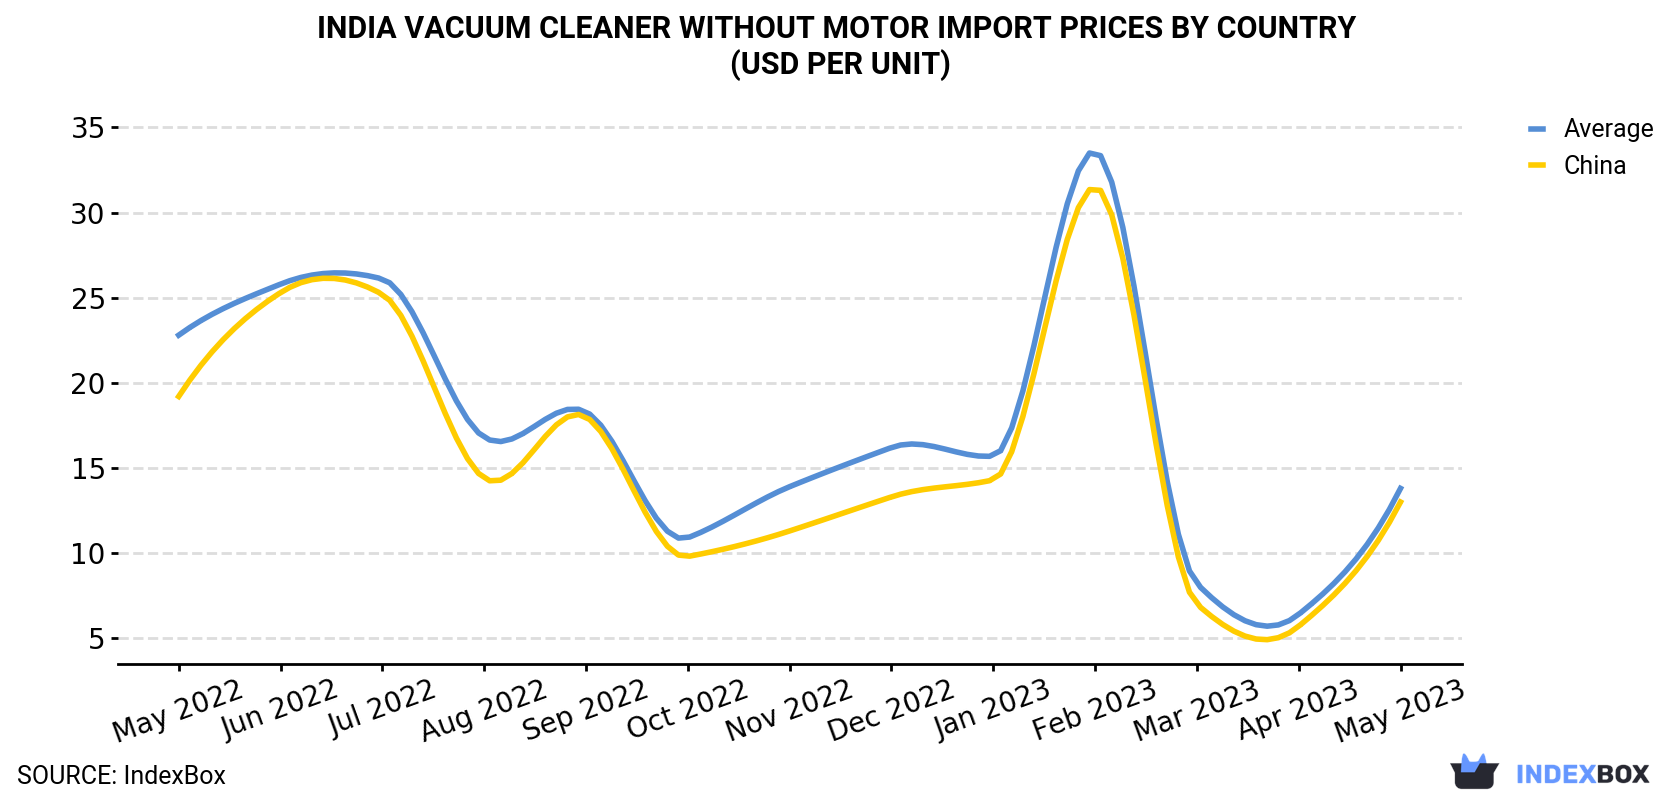 India Vacuum Cleaner Without Motor Import Prices By Country (USD Per Unit)